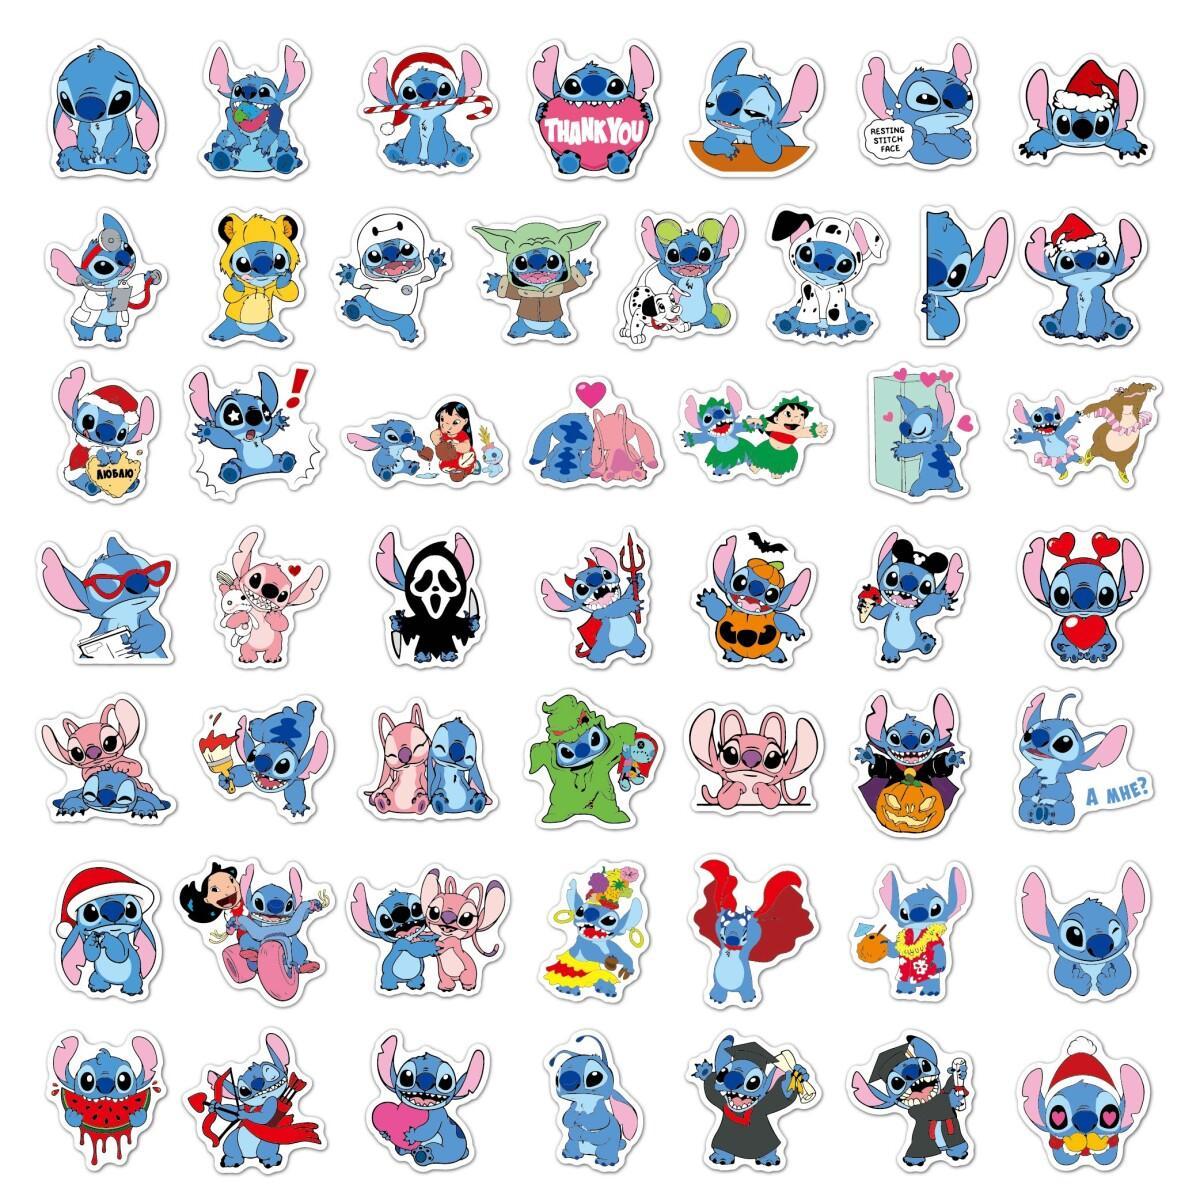  100 PCS Stitch Stickers,Stickers for Water Bottles,Gifts Cartoon  Stickers,Vinyl Waterproof Stickers for Laptop,Bumper,Water  Bottles,Computer,Phone,Hard hat,Car Stickers and Decals : Electronics